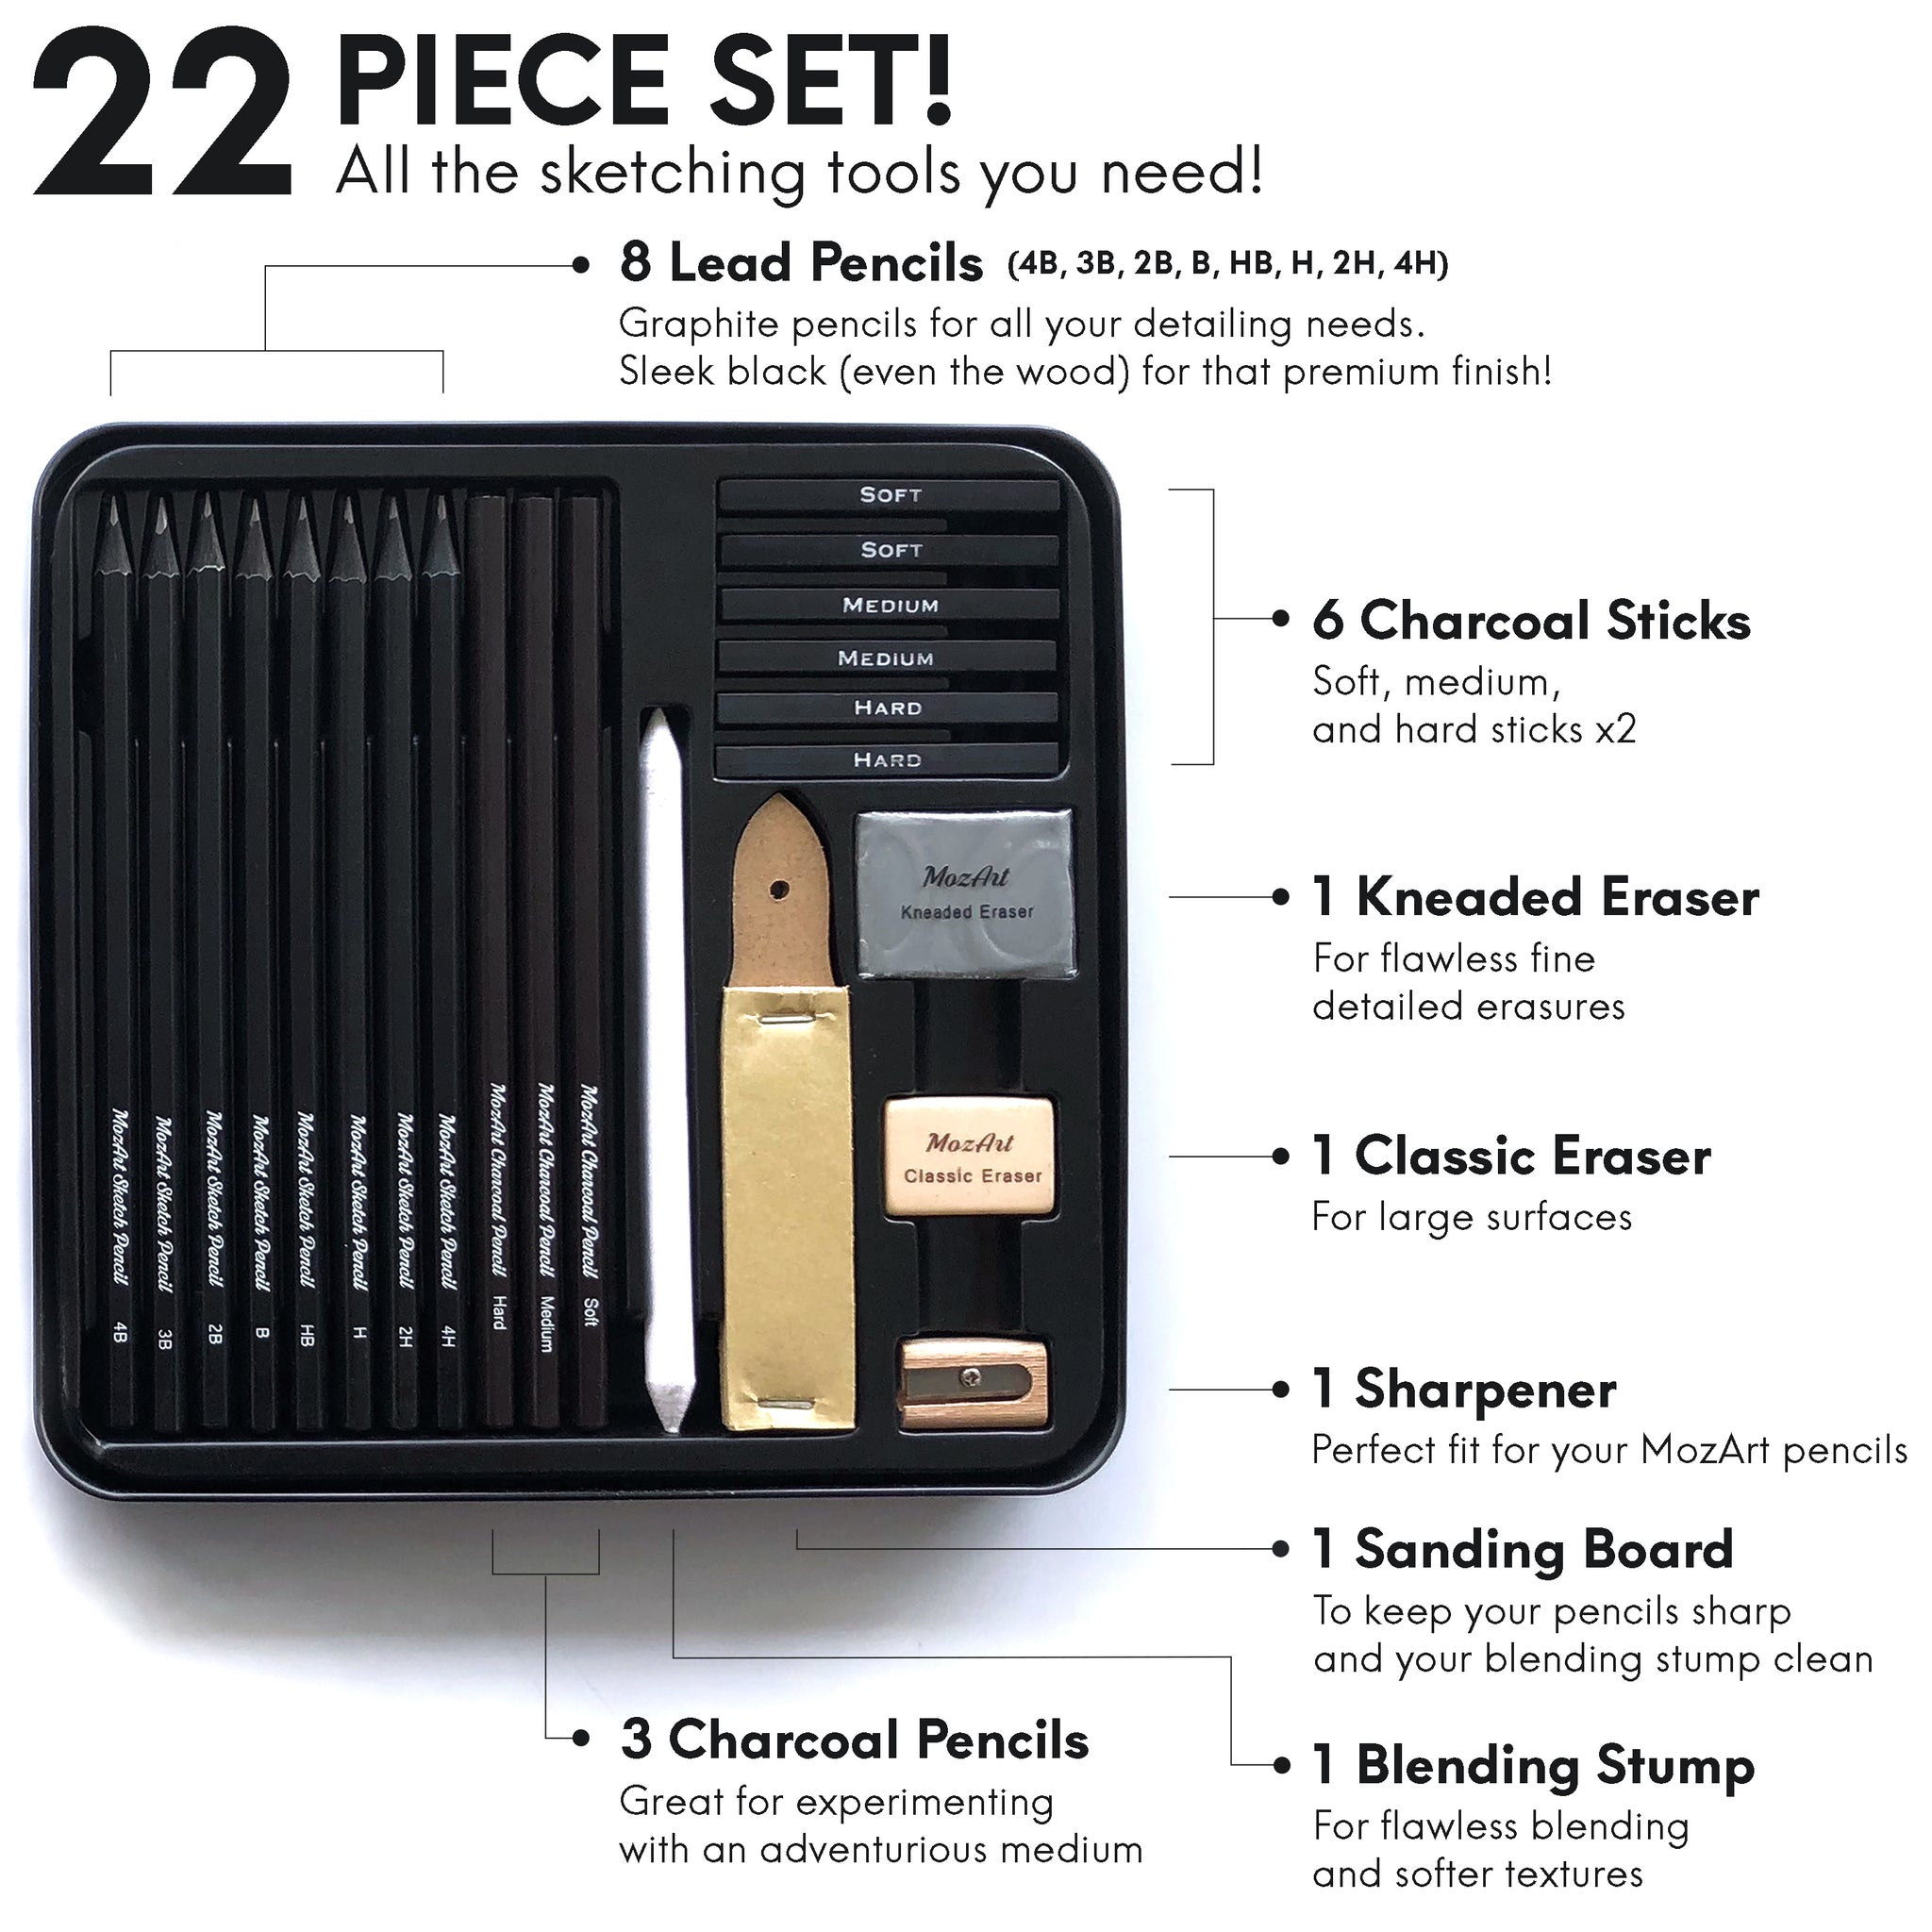 Graphite Drawing Pencils and Sketch Set (14-Piece Kit), 1B - 6H, Ideal for Drawing  Art, Sketching, Shading, Artist Pencils for Beginners & Pro Artists 